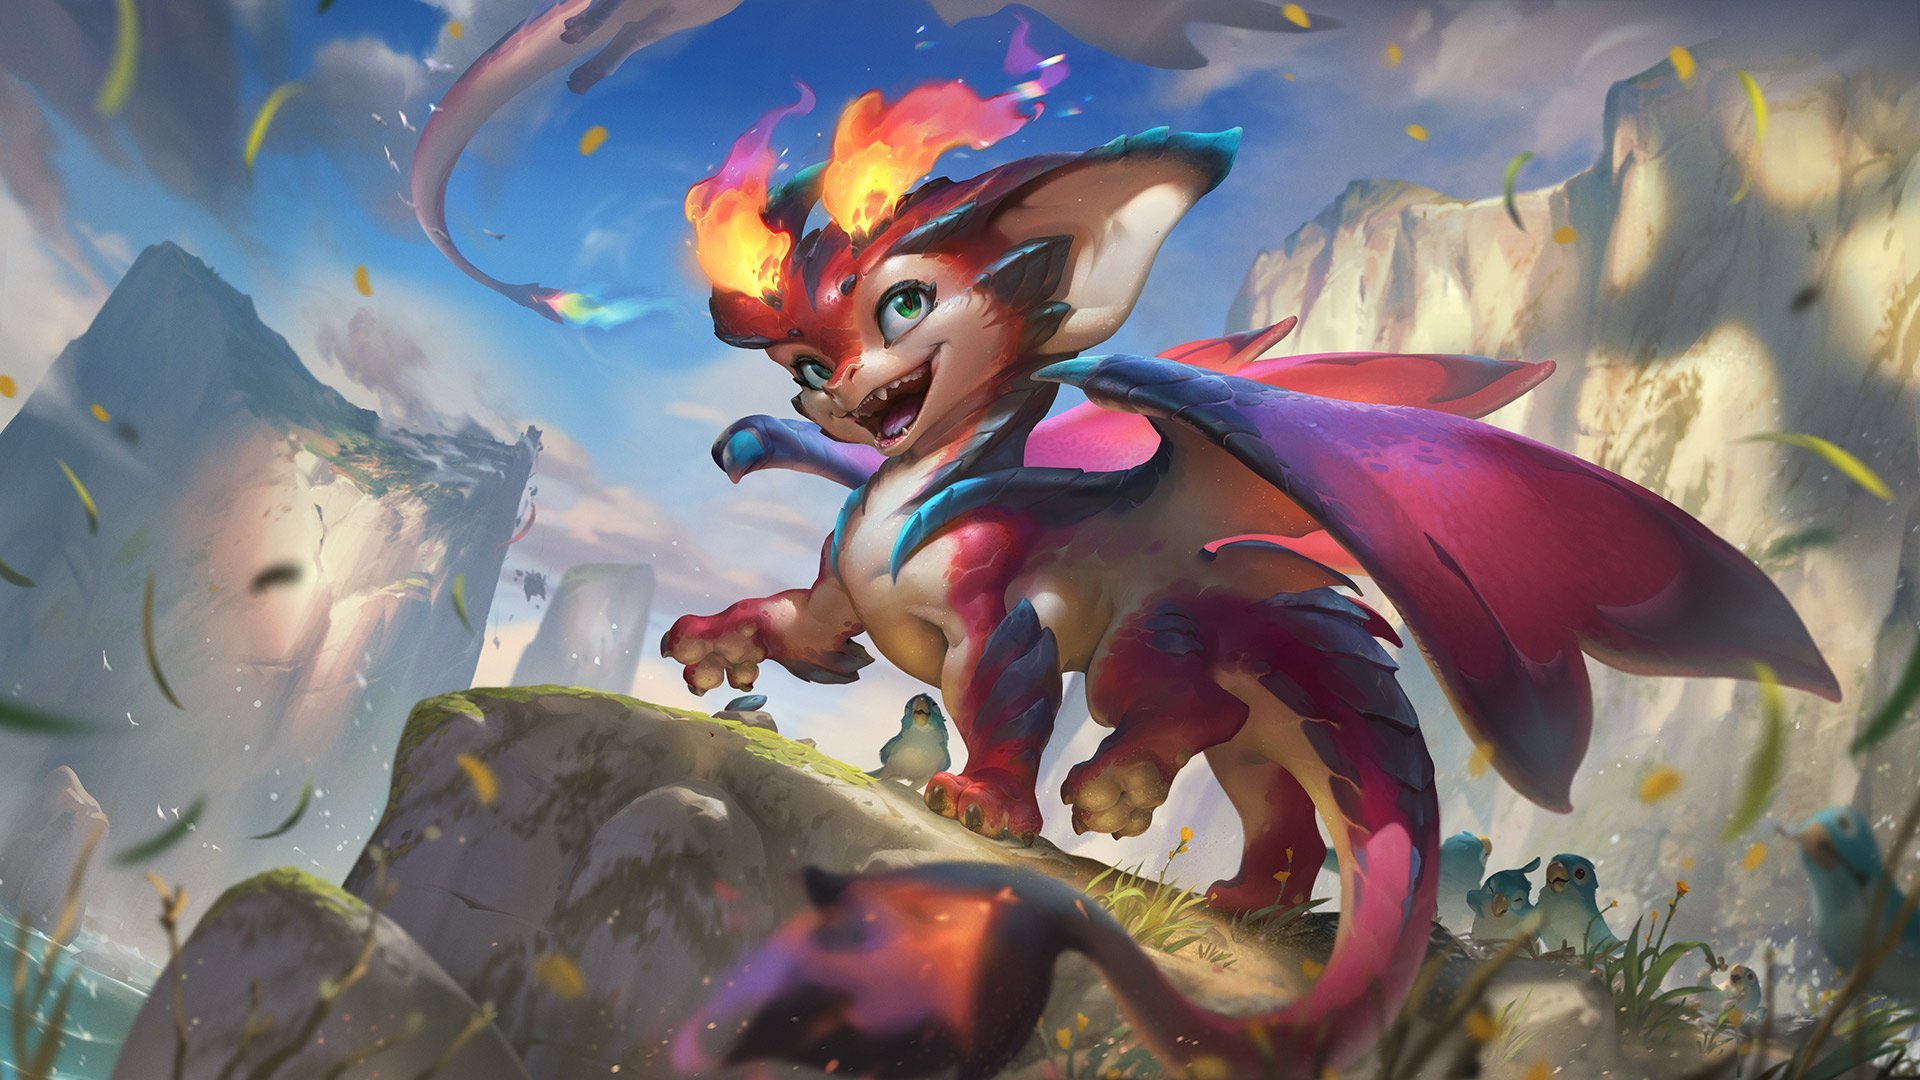 Patch 14.4 Spotlights Smolder, the Most Contested Champion in LoL